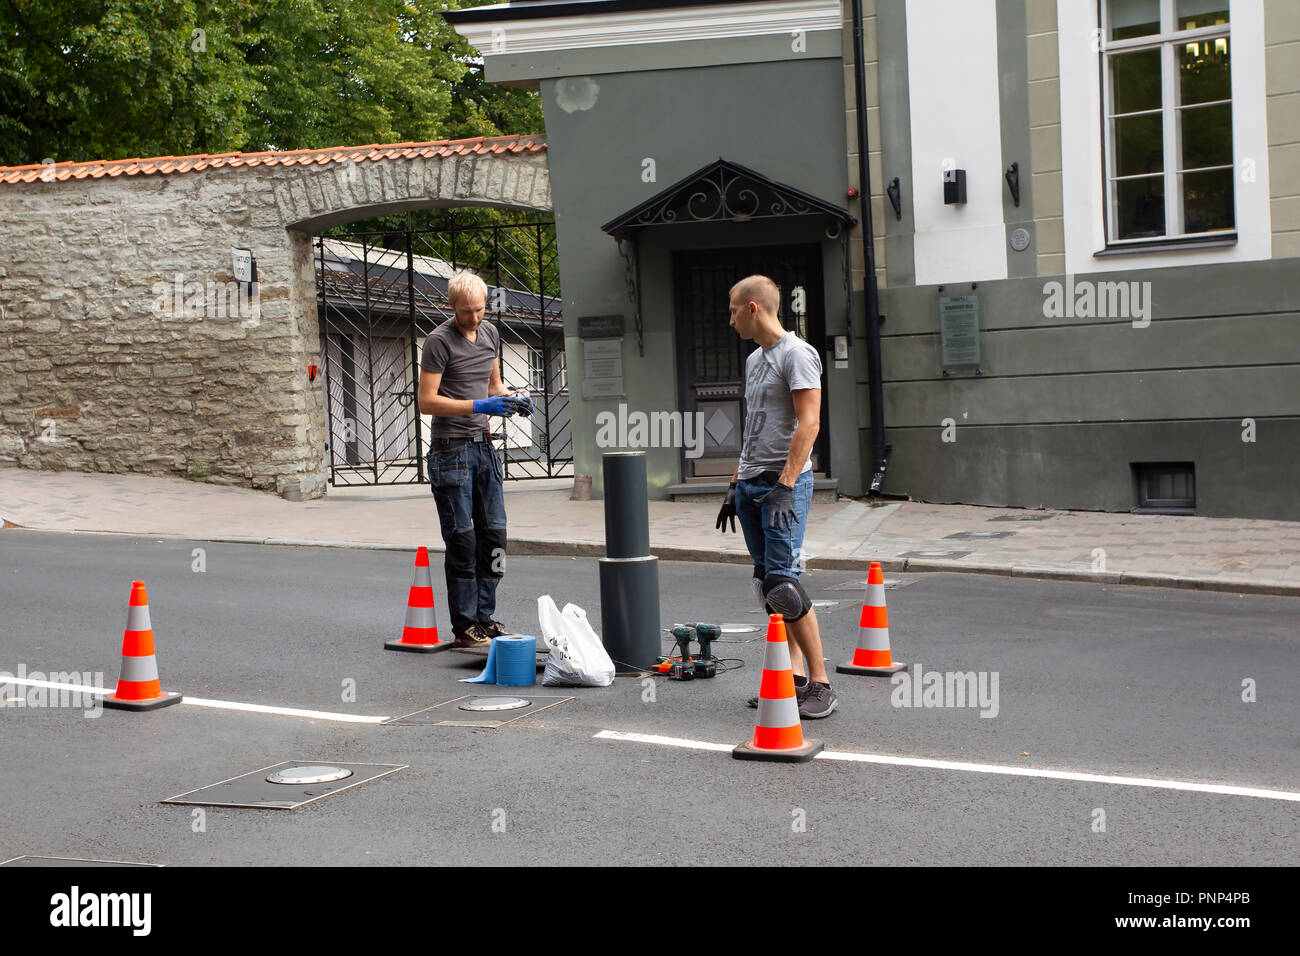 Two Men Working on Retractable Security Barrier Stock Photo